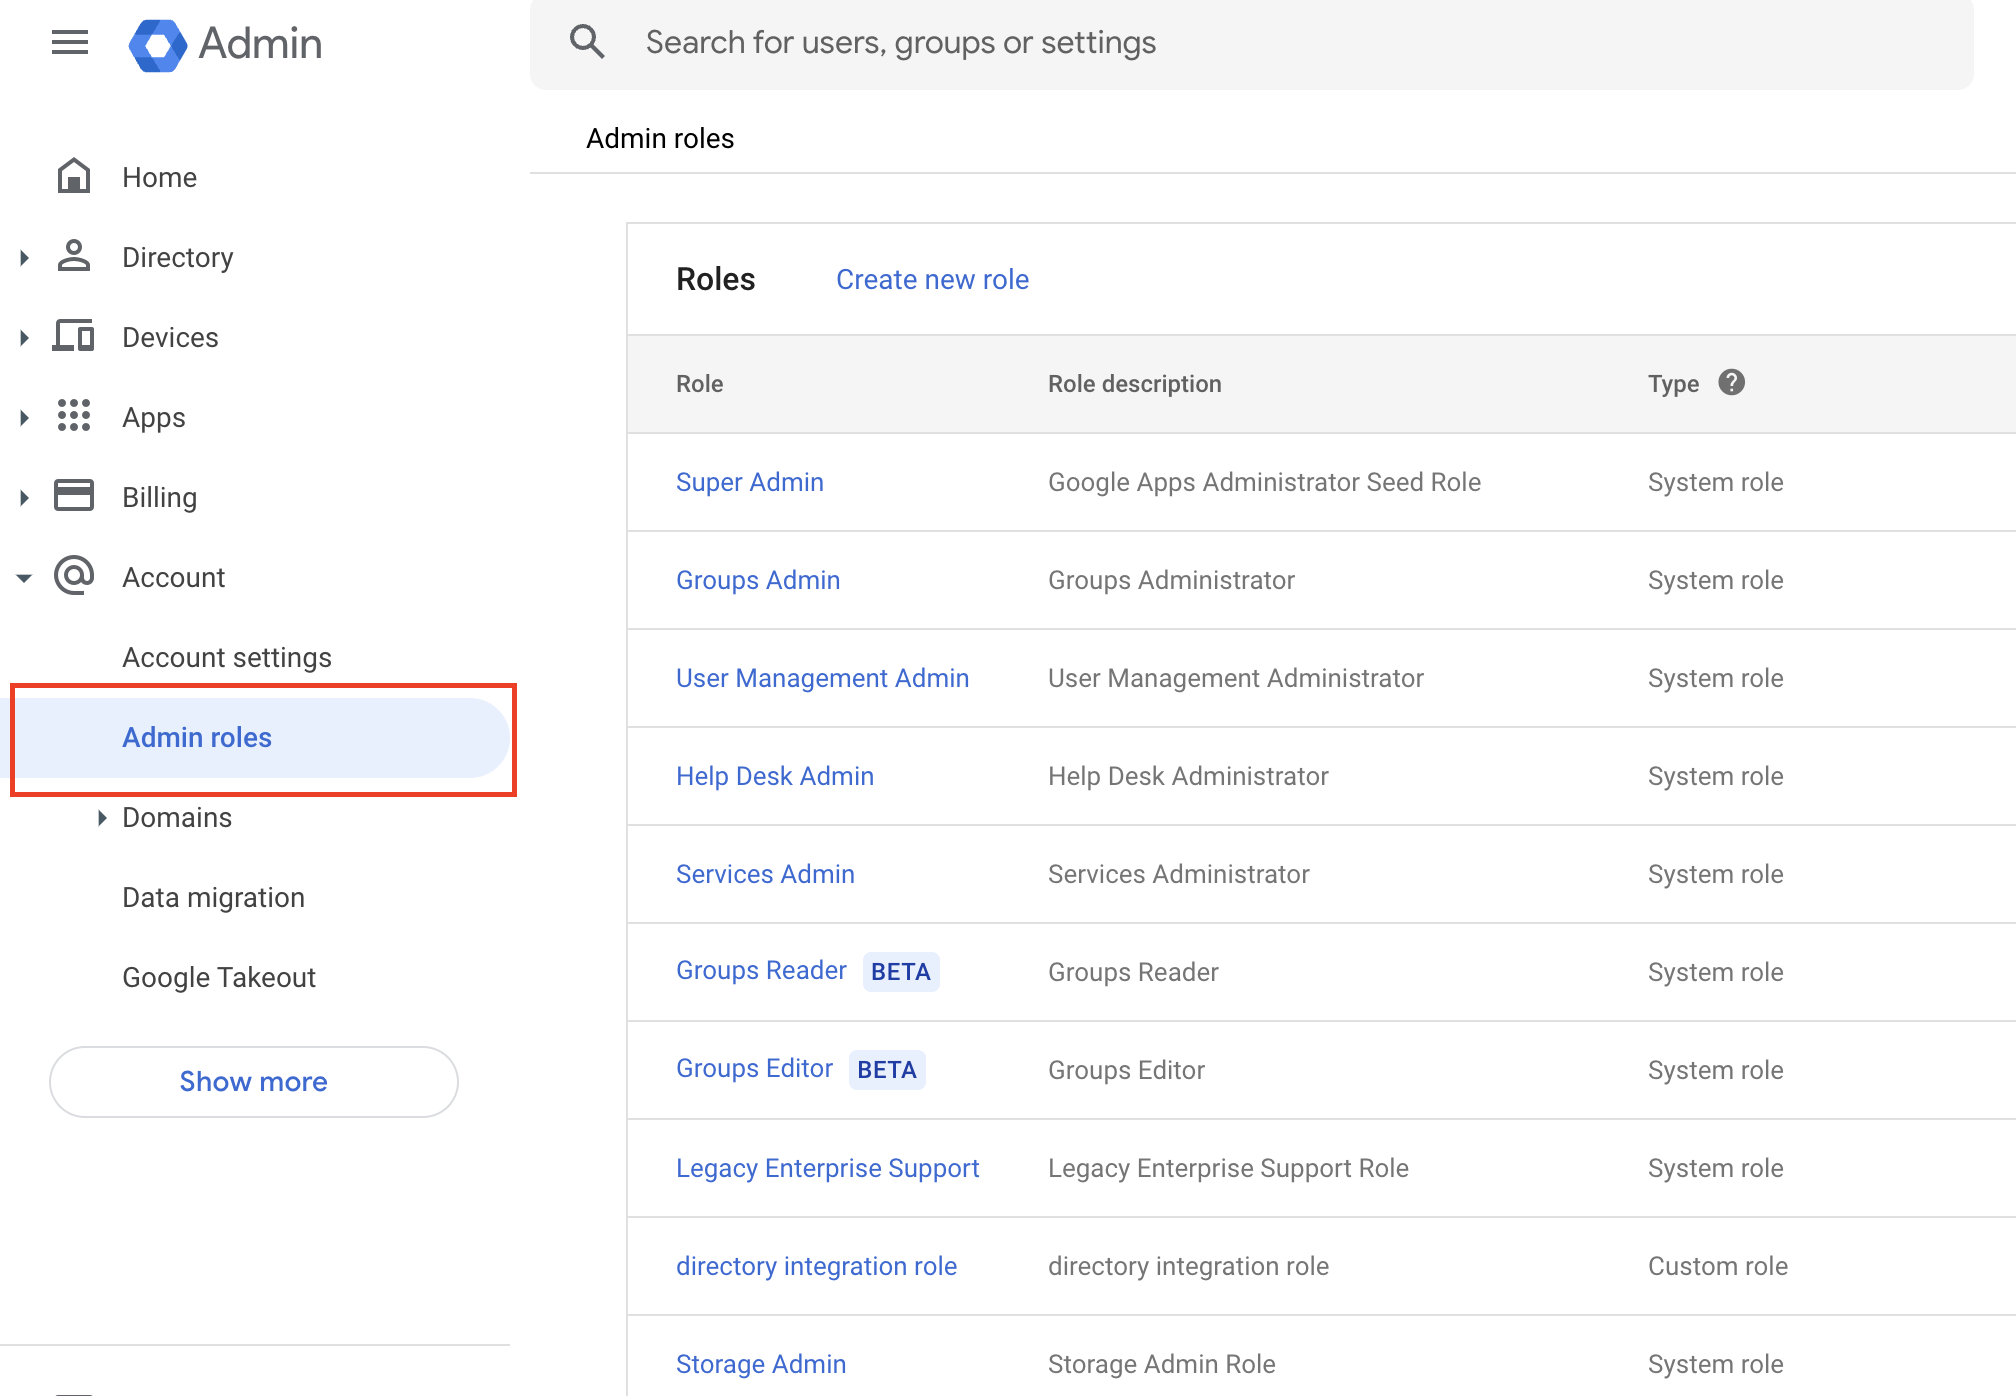 Access the admin console in your Google account